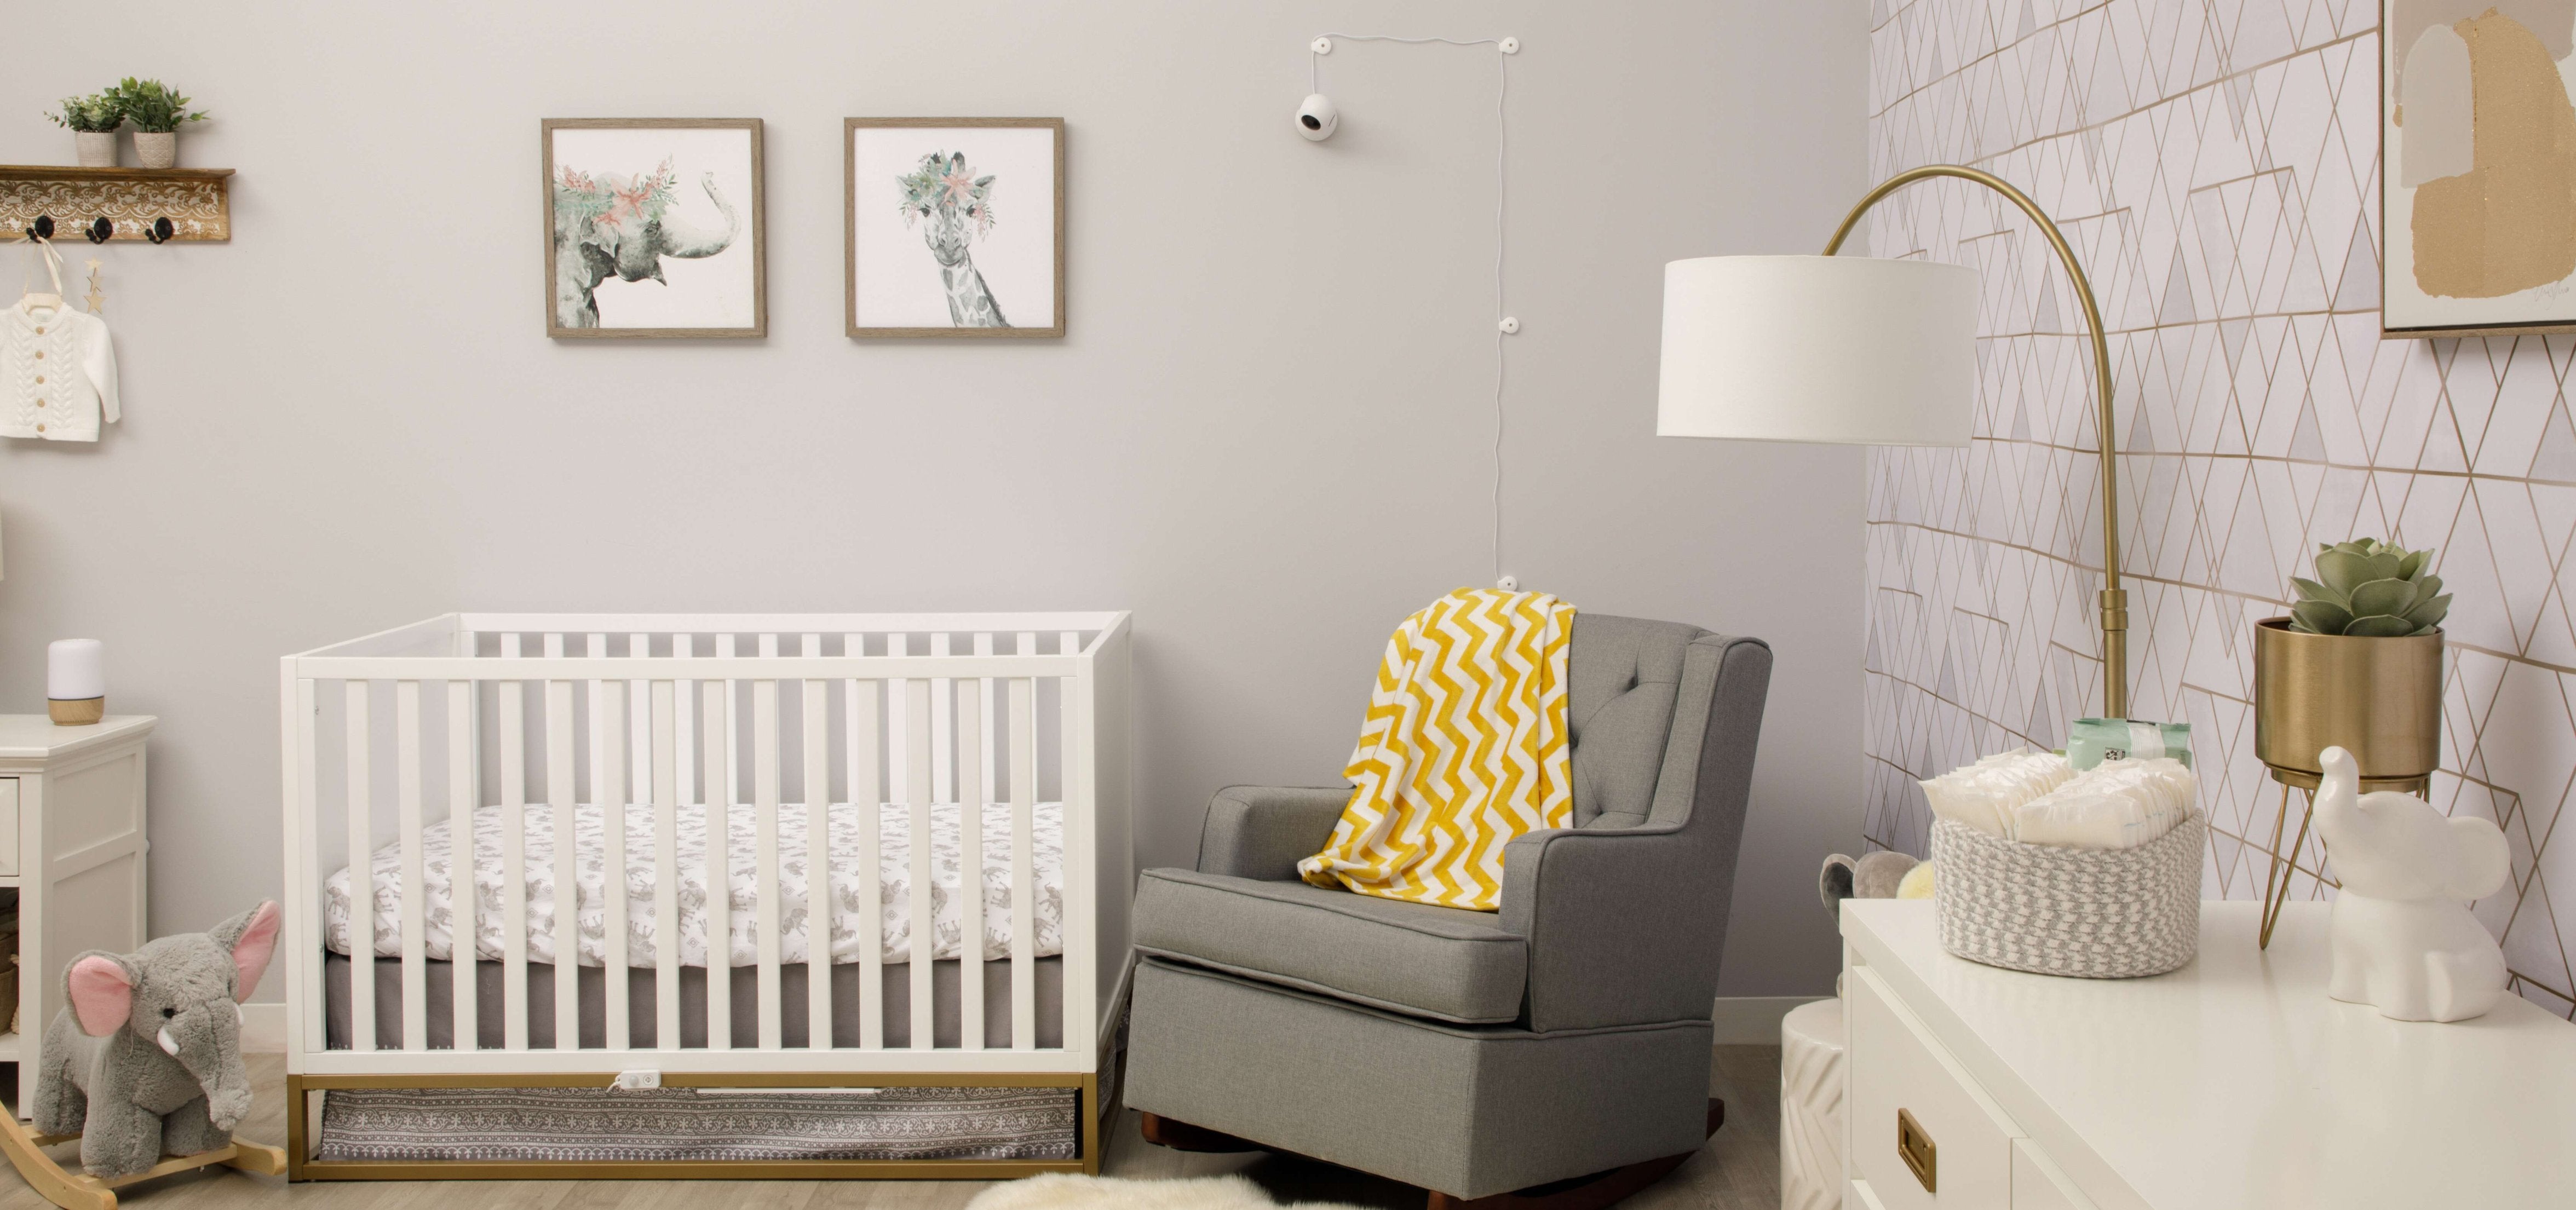 Childproofing Room to Room: The Nursery